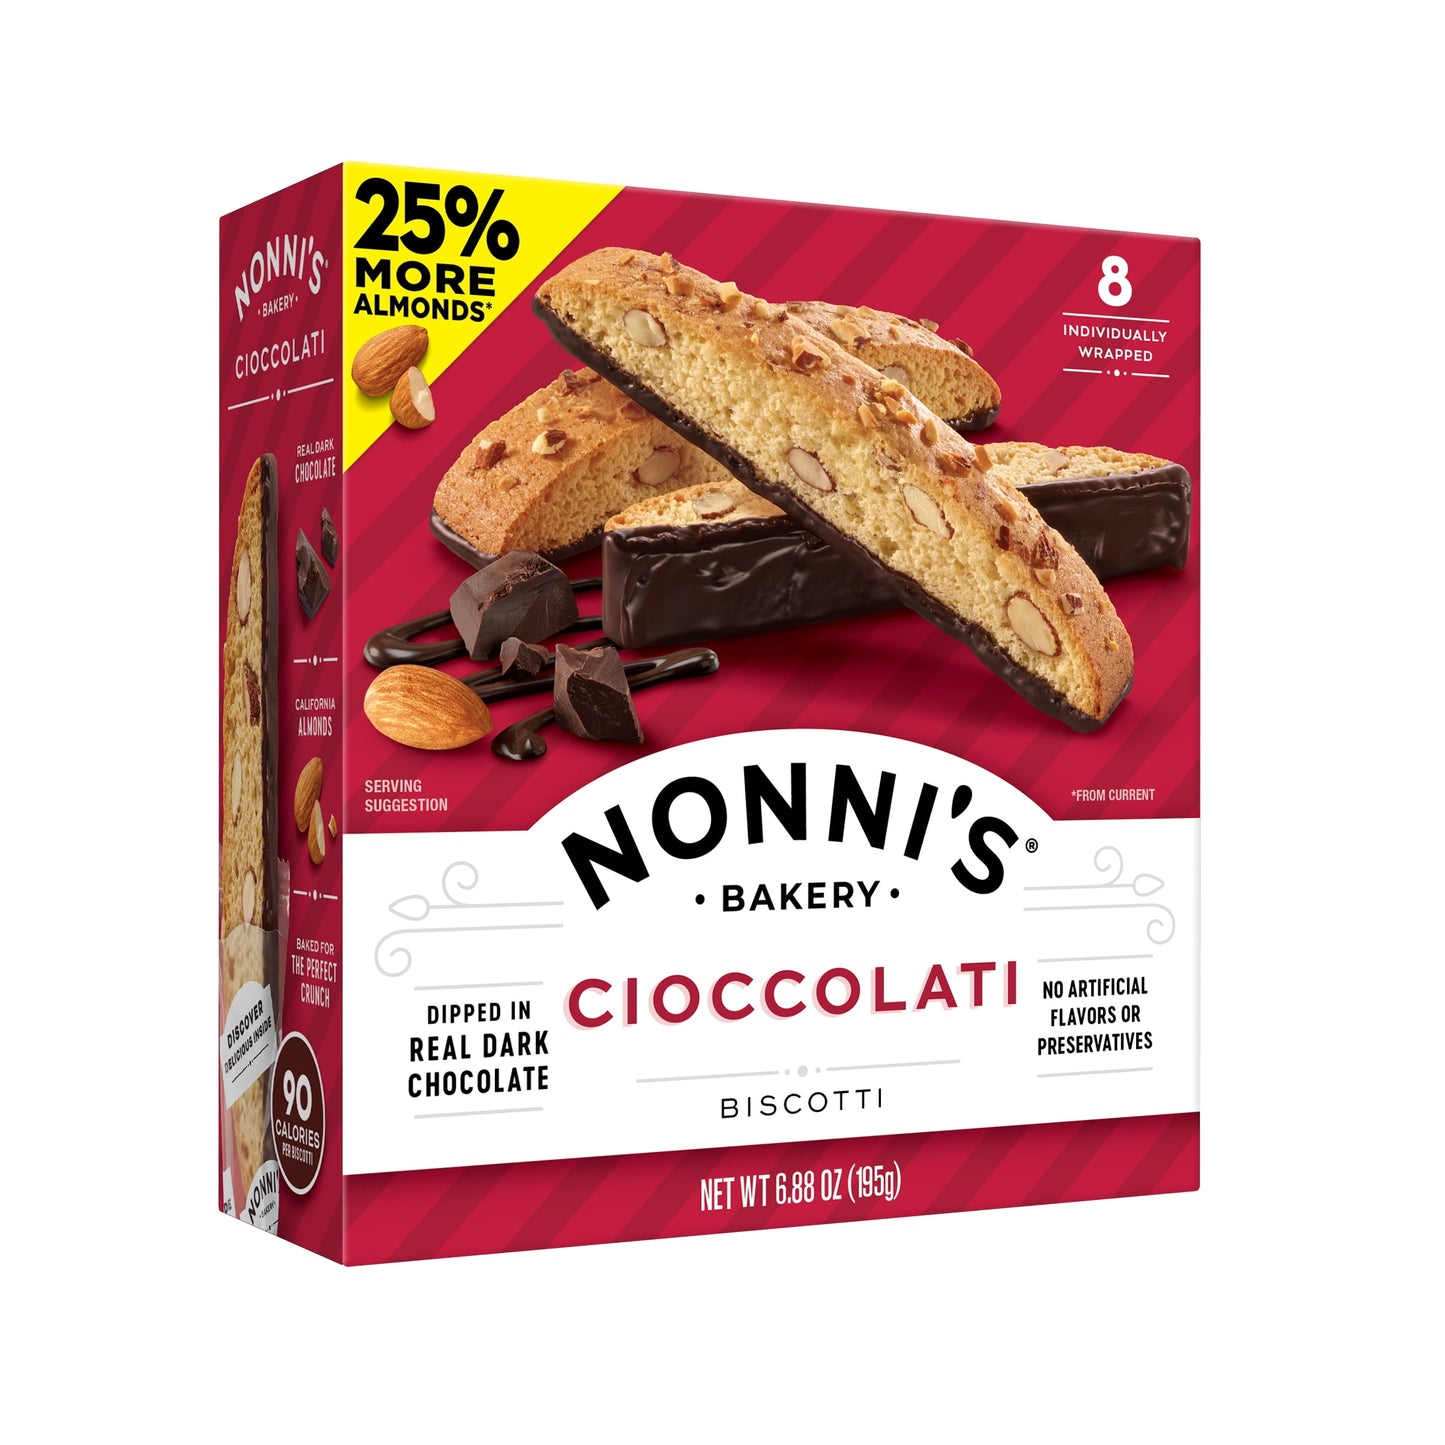 , Cioccolati Biscotti, Dark Chocolate Almond Cookie, 6.8 Oz (195G), 8 Count, Individually Wrapped and Ready to Eat